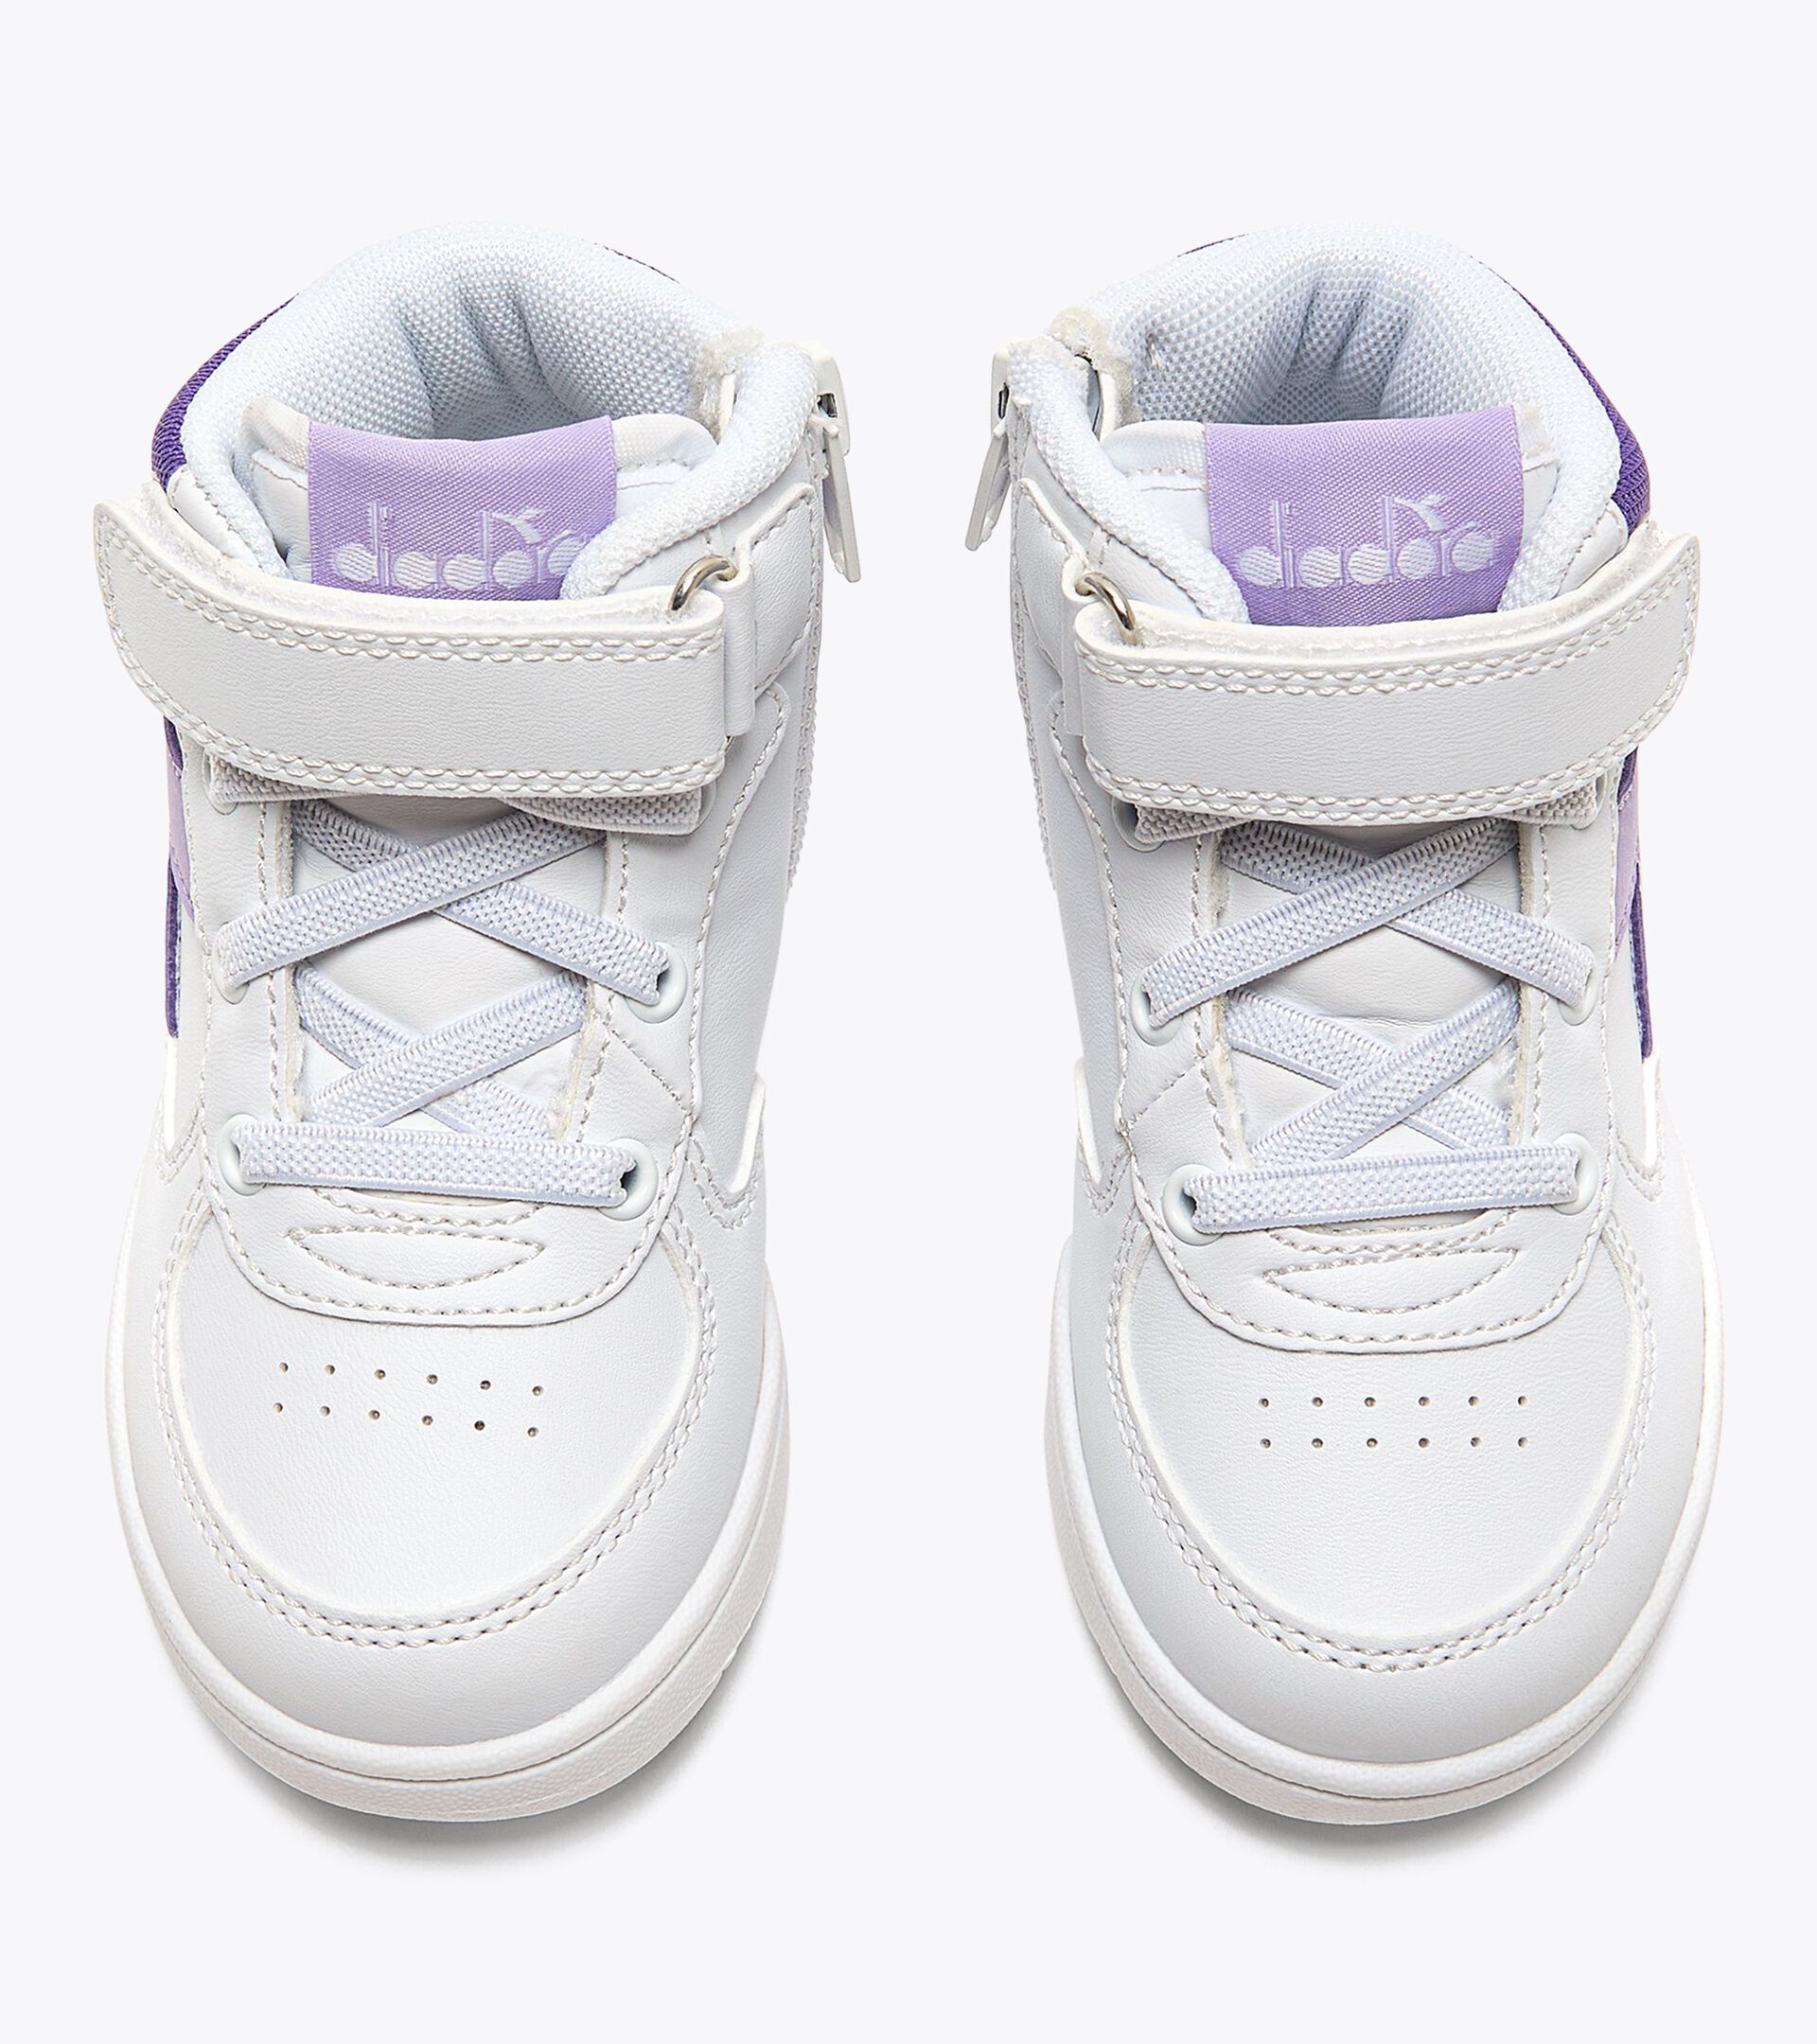 Sports shoes - Toddlers 1-4 years RAPTOR MID TD WHT/PURPLE ROSE/PASSION FLOWER - Diadora